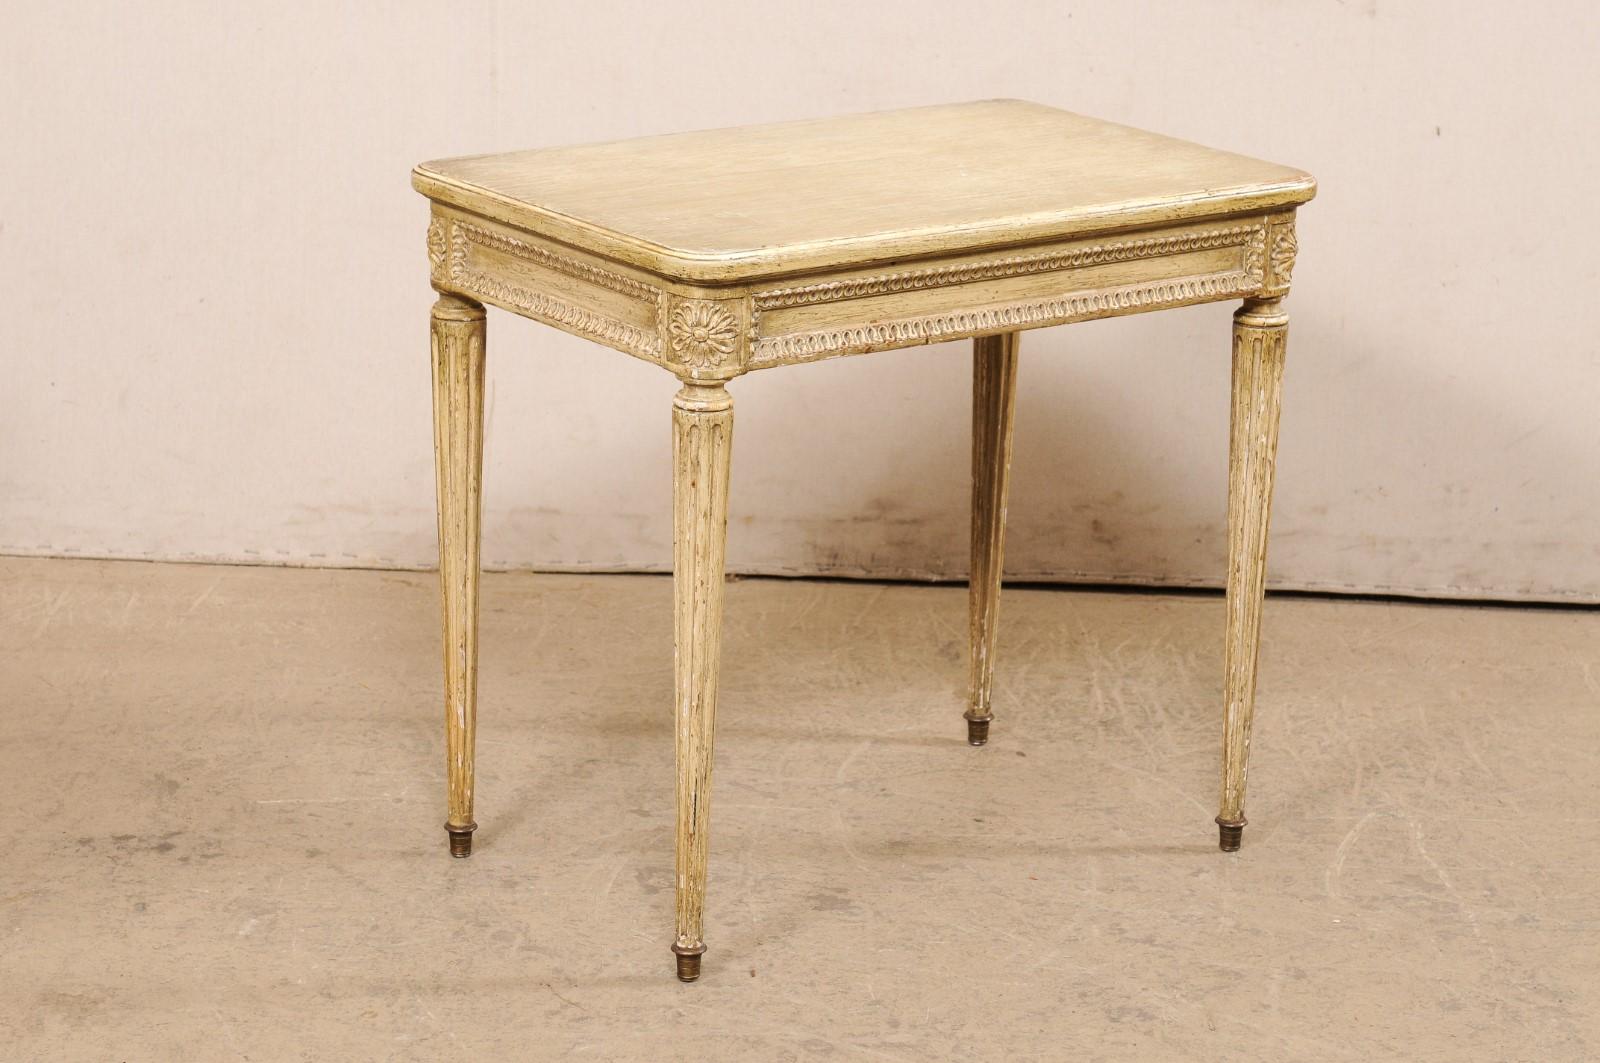 Louis XVI Style French Side Table with its Original Painted Finish Early 20th C. For Sale 4